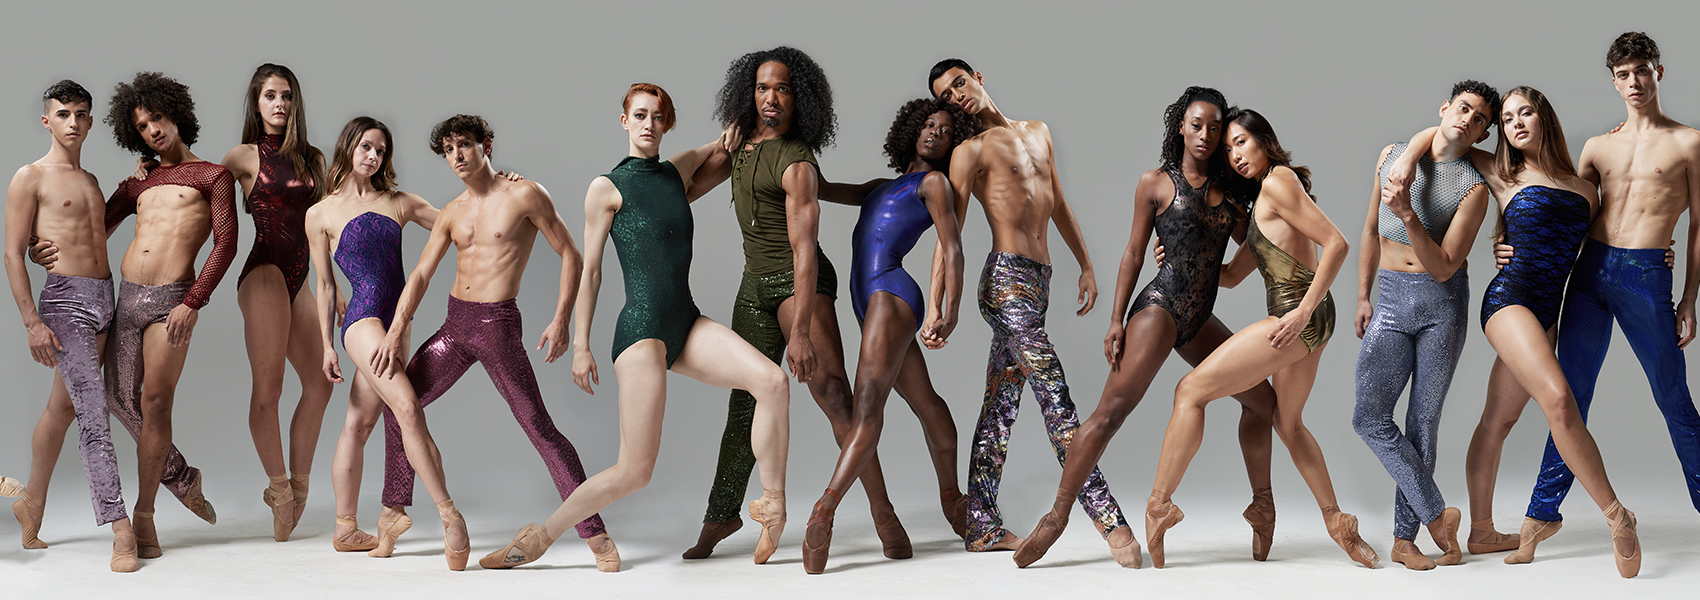 The Complexions dance troupe is pictured standing. They are posing in sequined pants and leotards of various colors.